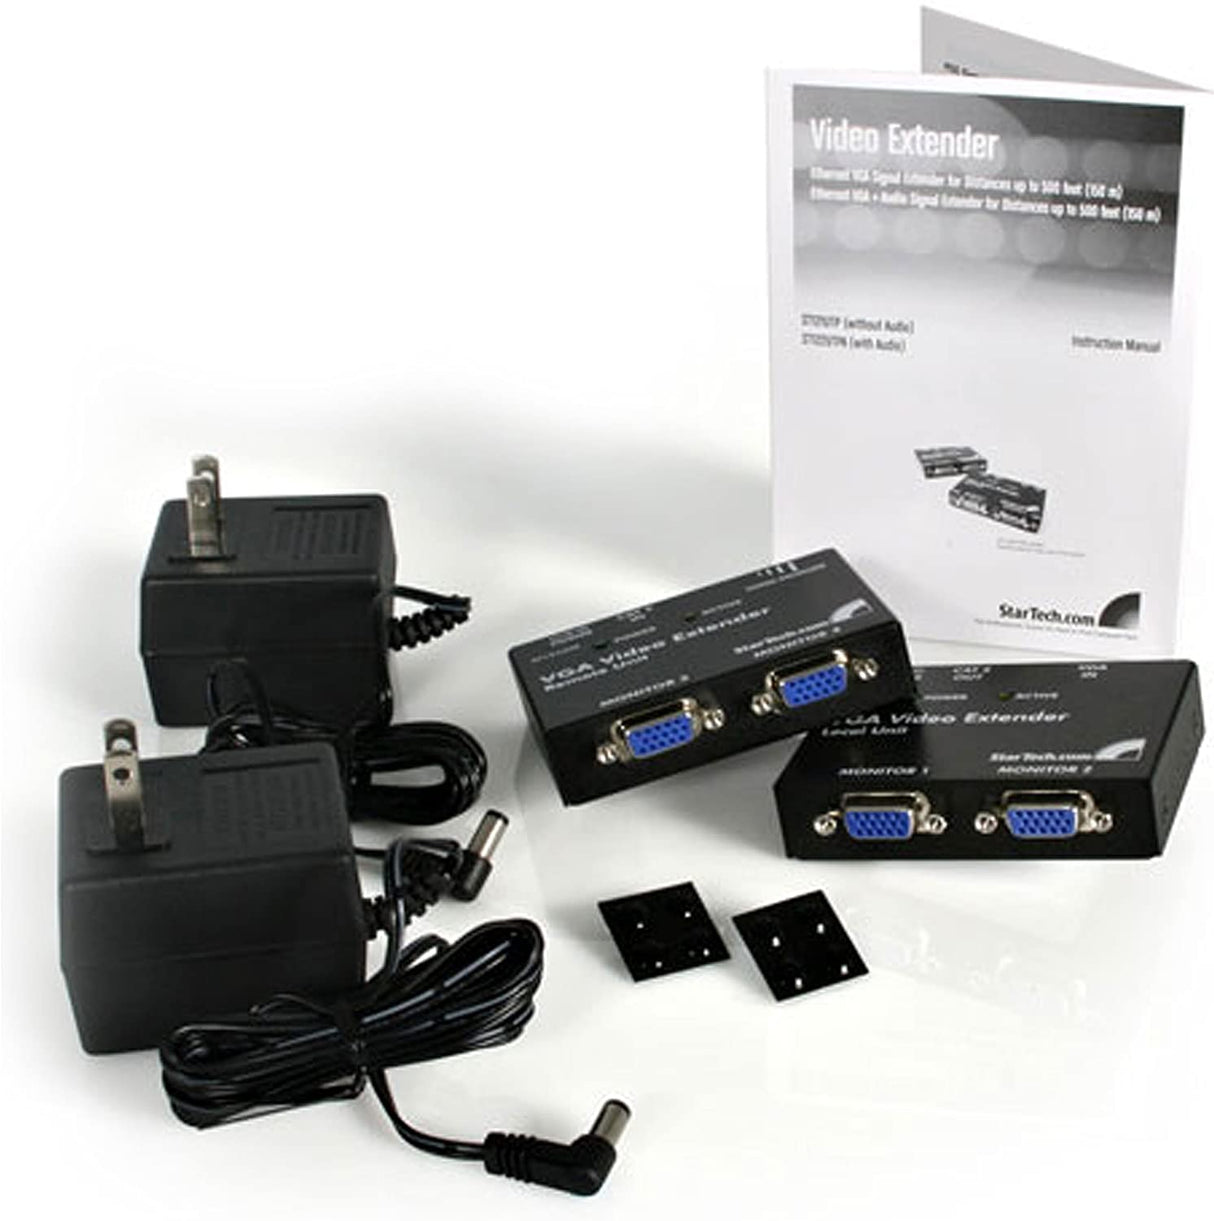 StarTech.com VGA Video Extender over Cat5 (ST121 Series) - Up to 500ft (150m) - VGA over Cat 5 Extender - 2 Local and 2 Remote (ST121UTP) No Audio Support Two power adapters